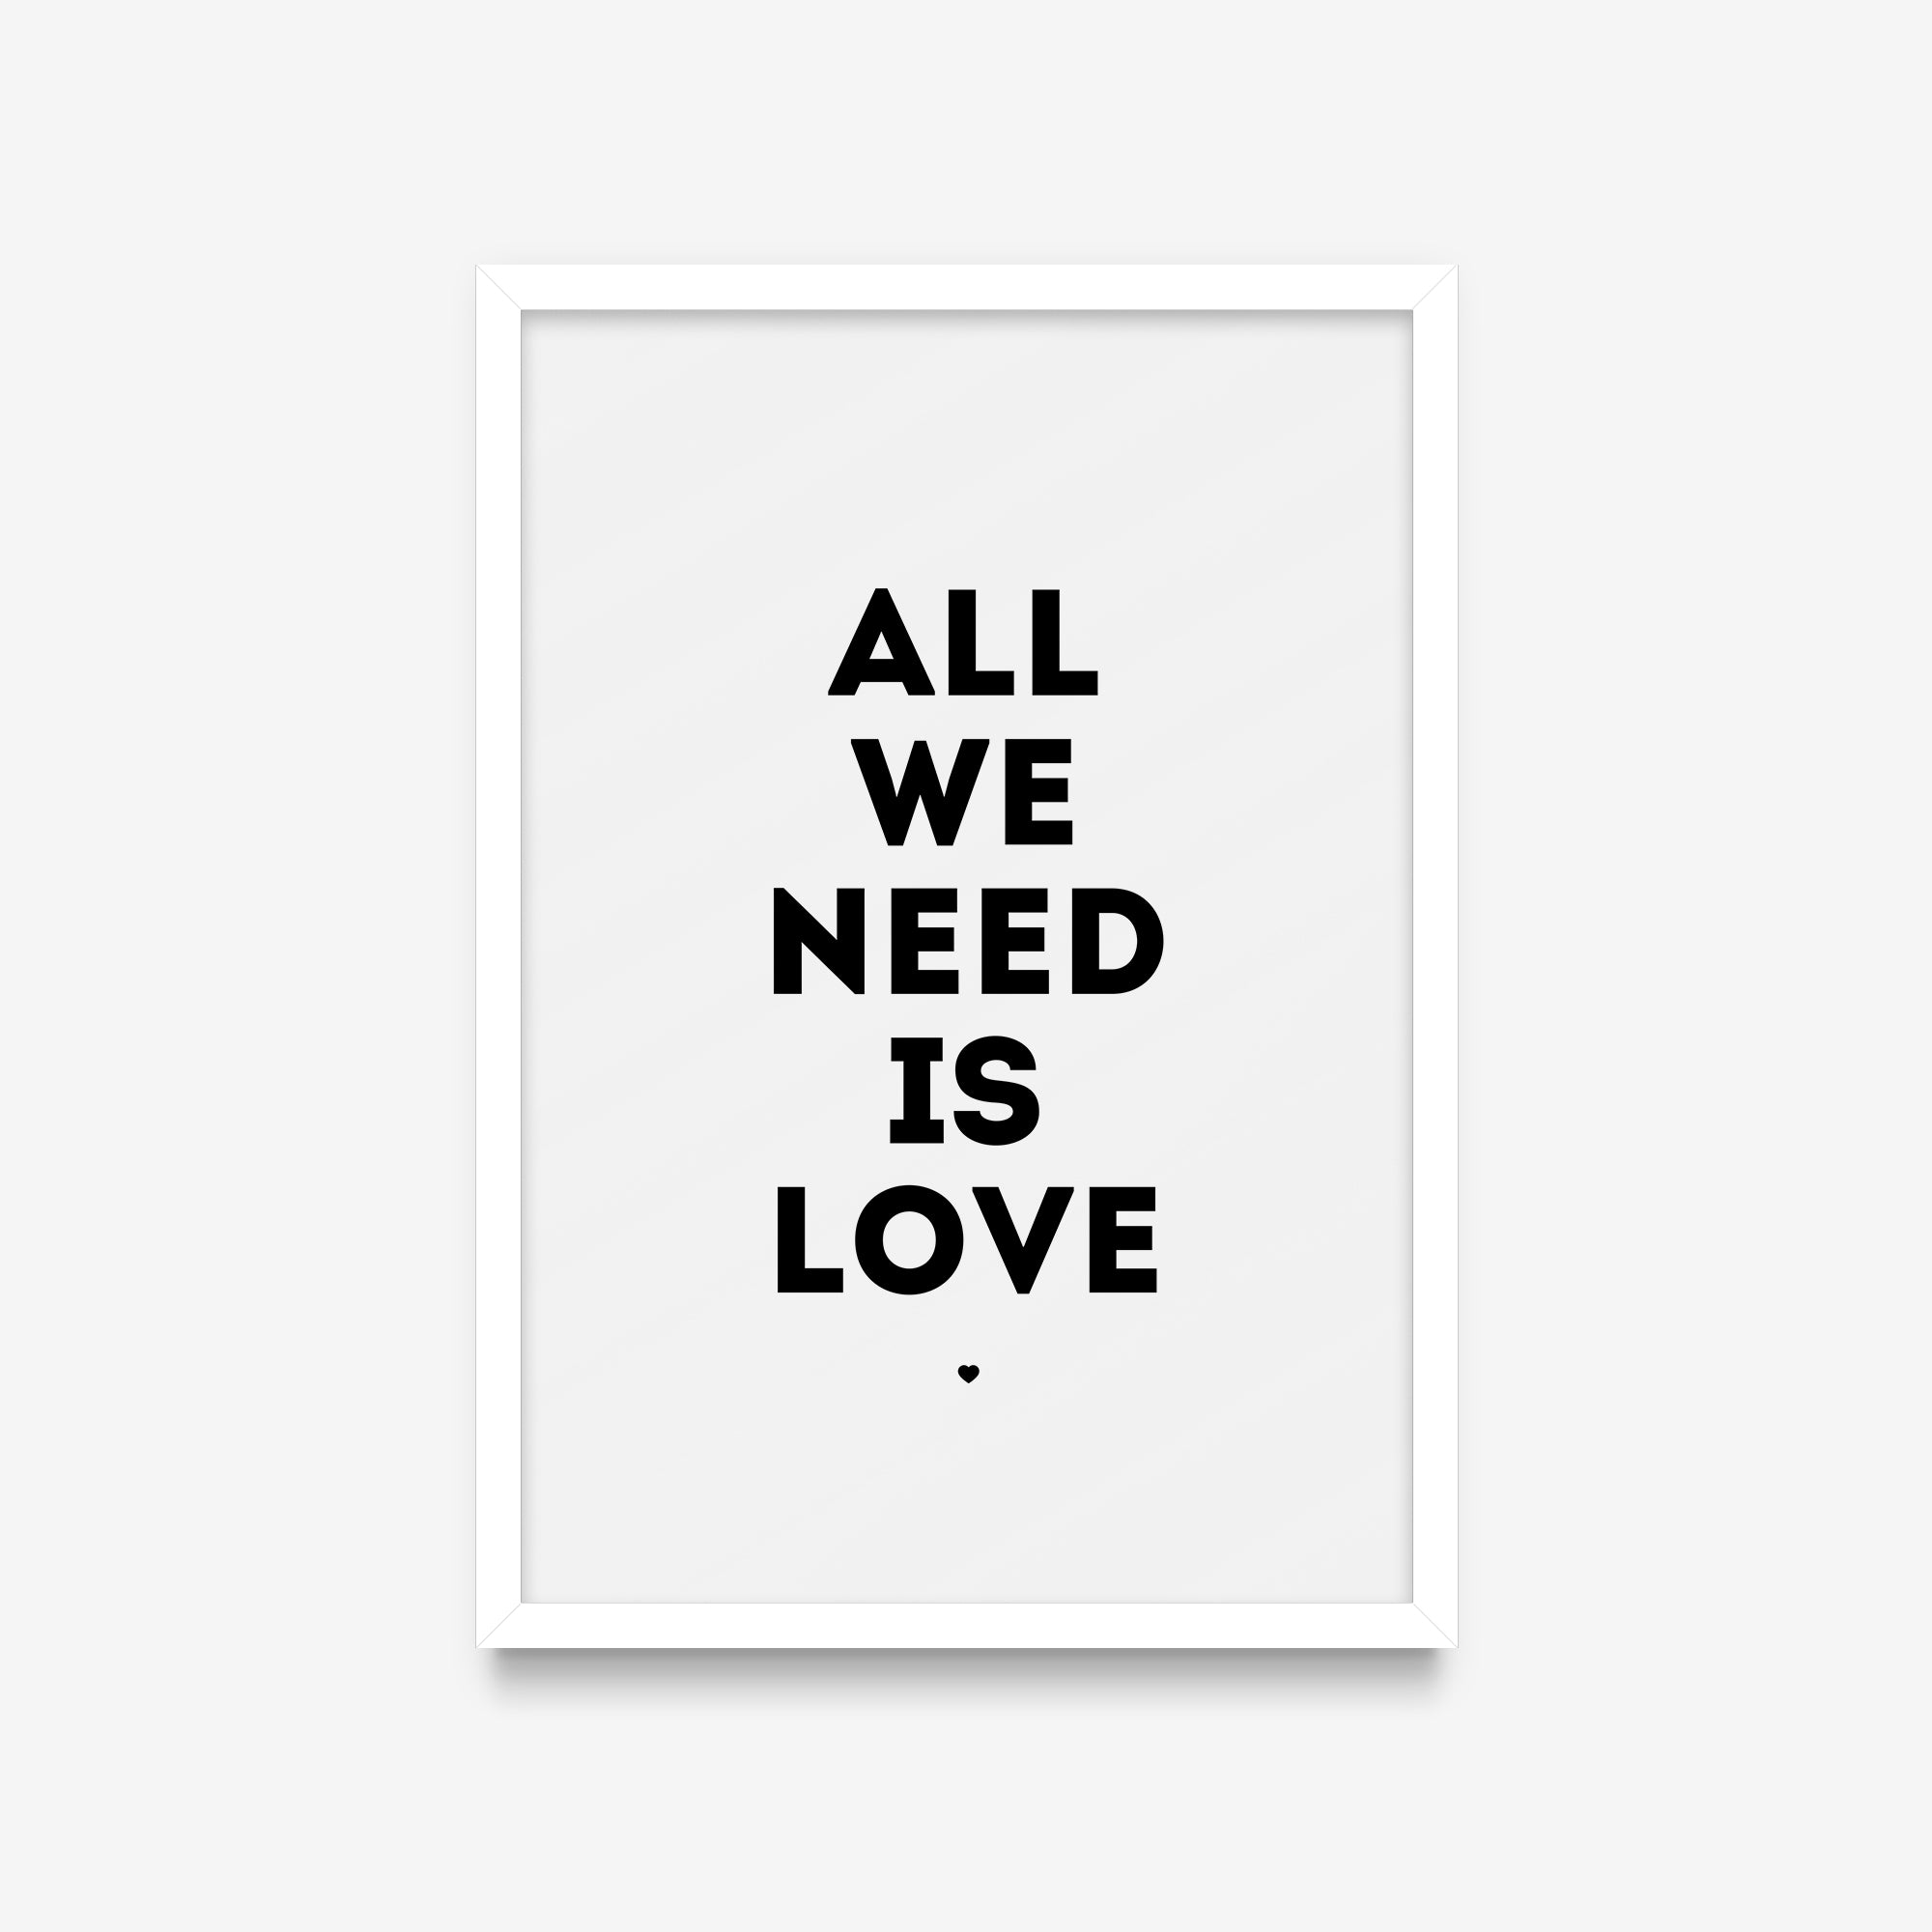 Frases - All we need is love